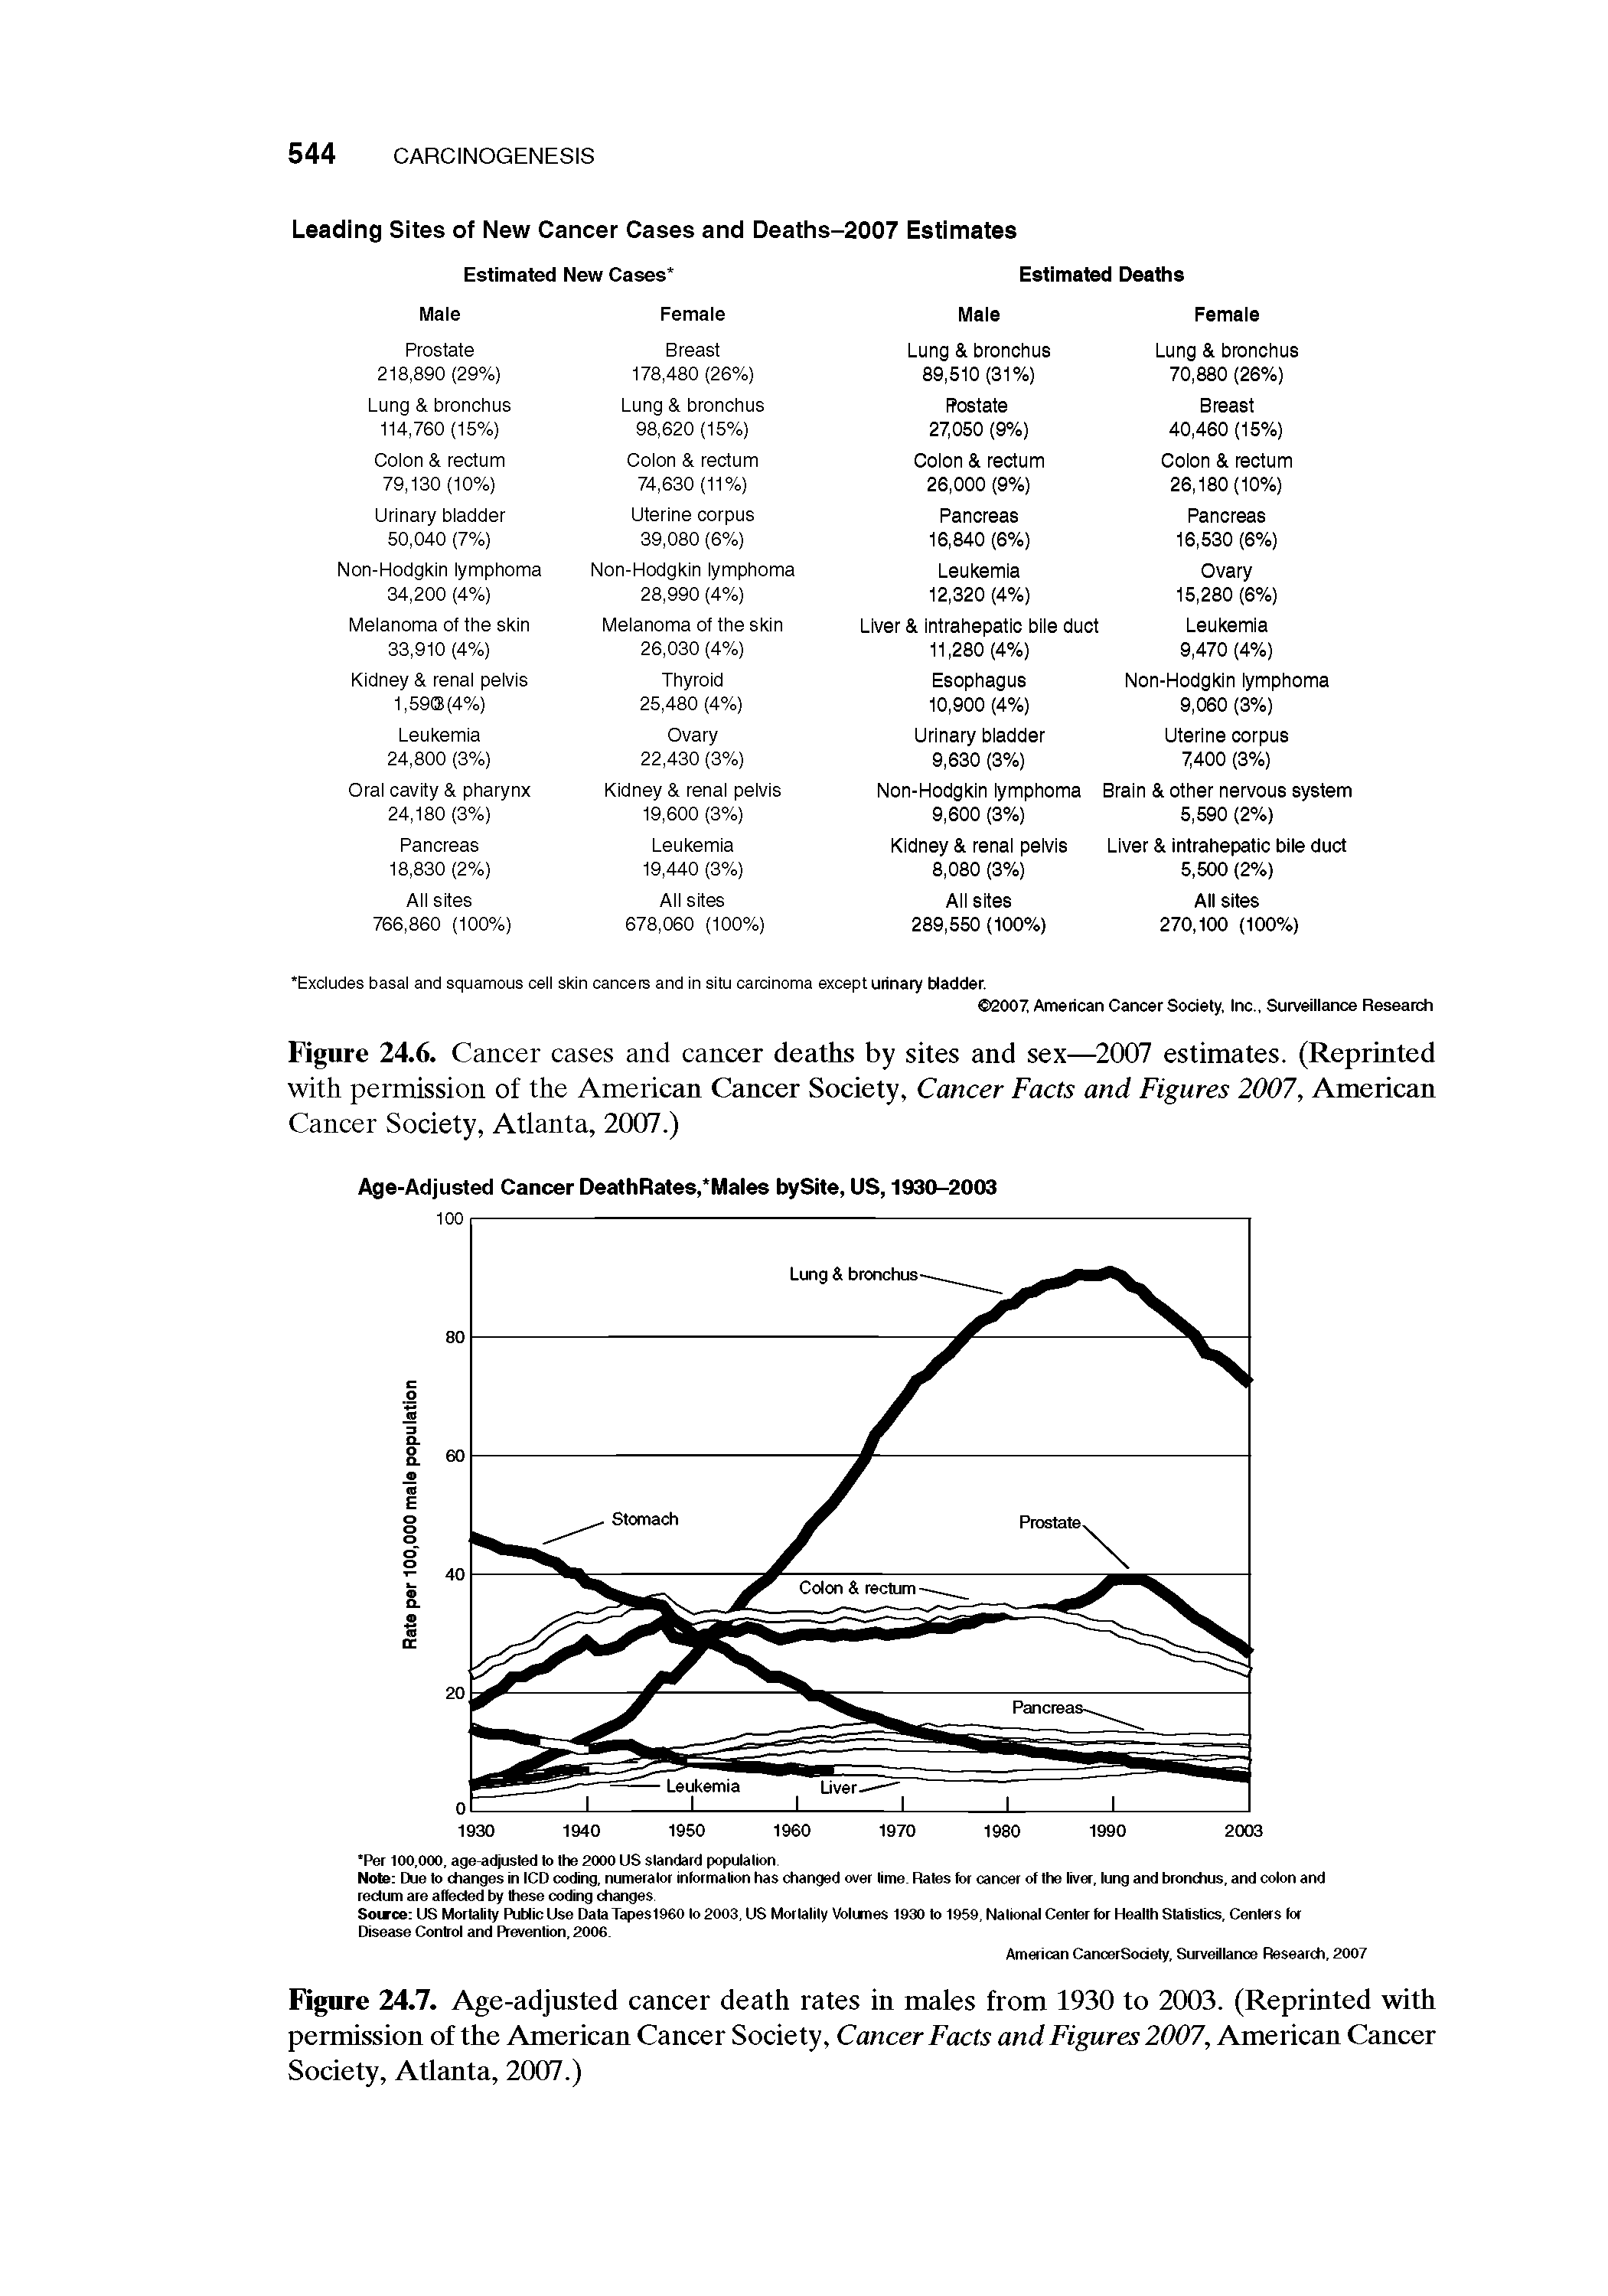 Figure 24.7. Age-adjusted cancer death rates in males from 1930 to 2003. (Reprinted with permission of the American Cancer Society, Cancer Facts and Figures 2007, American Cancer Society, Atlanta, 2007.)...